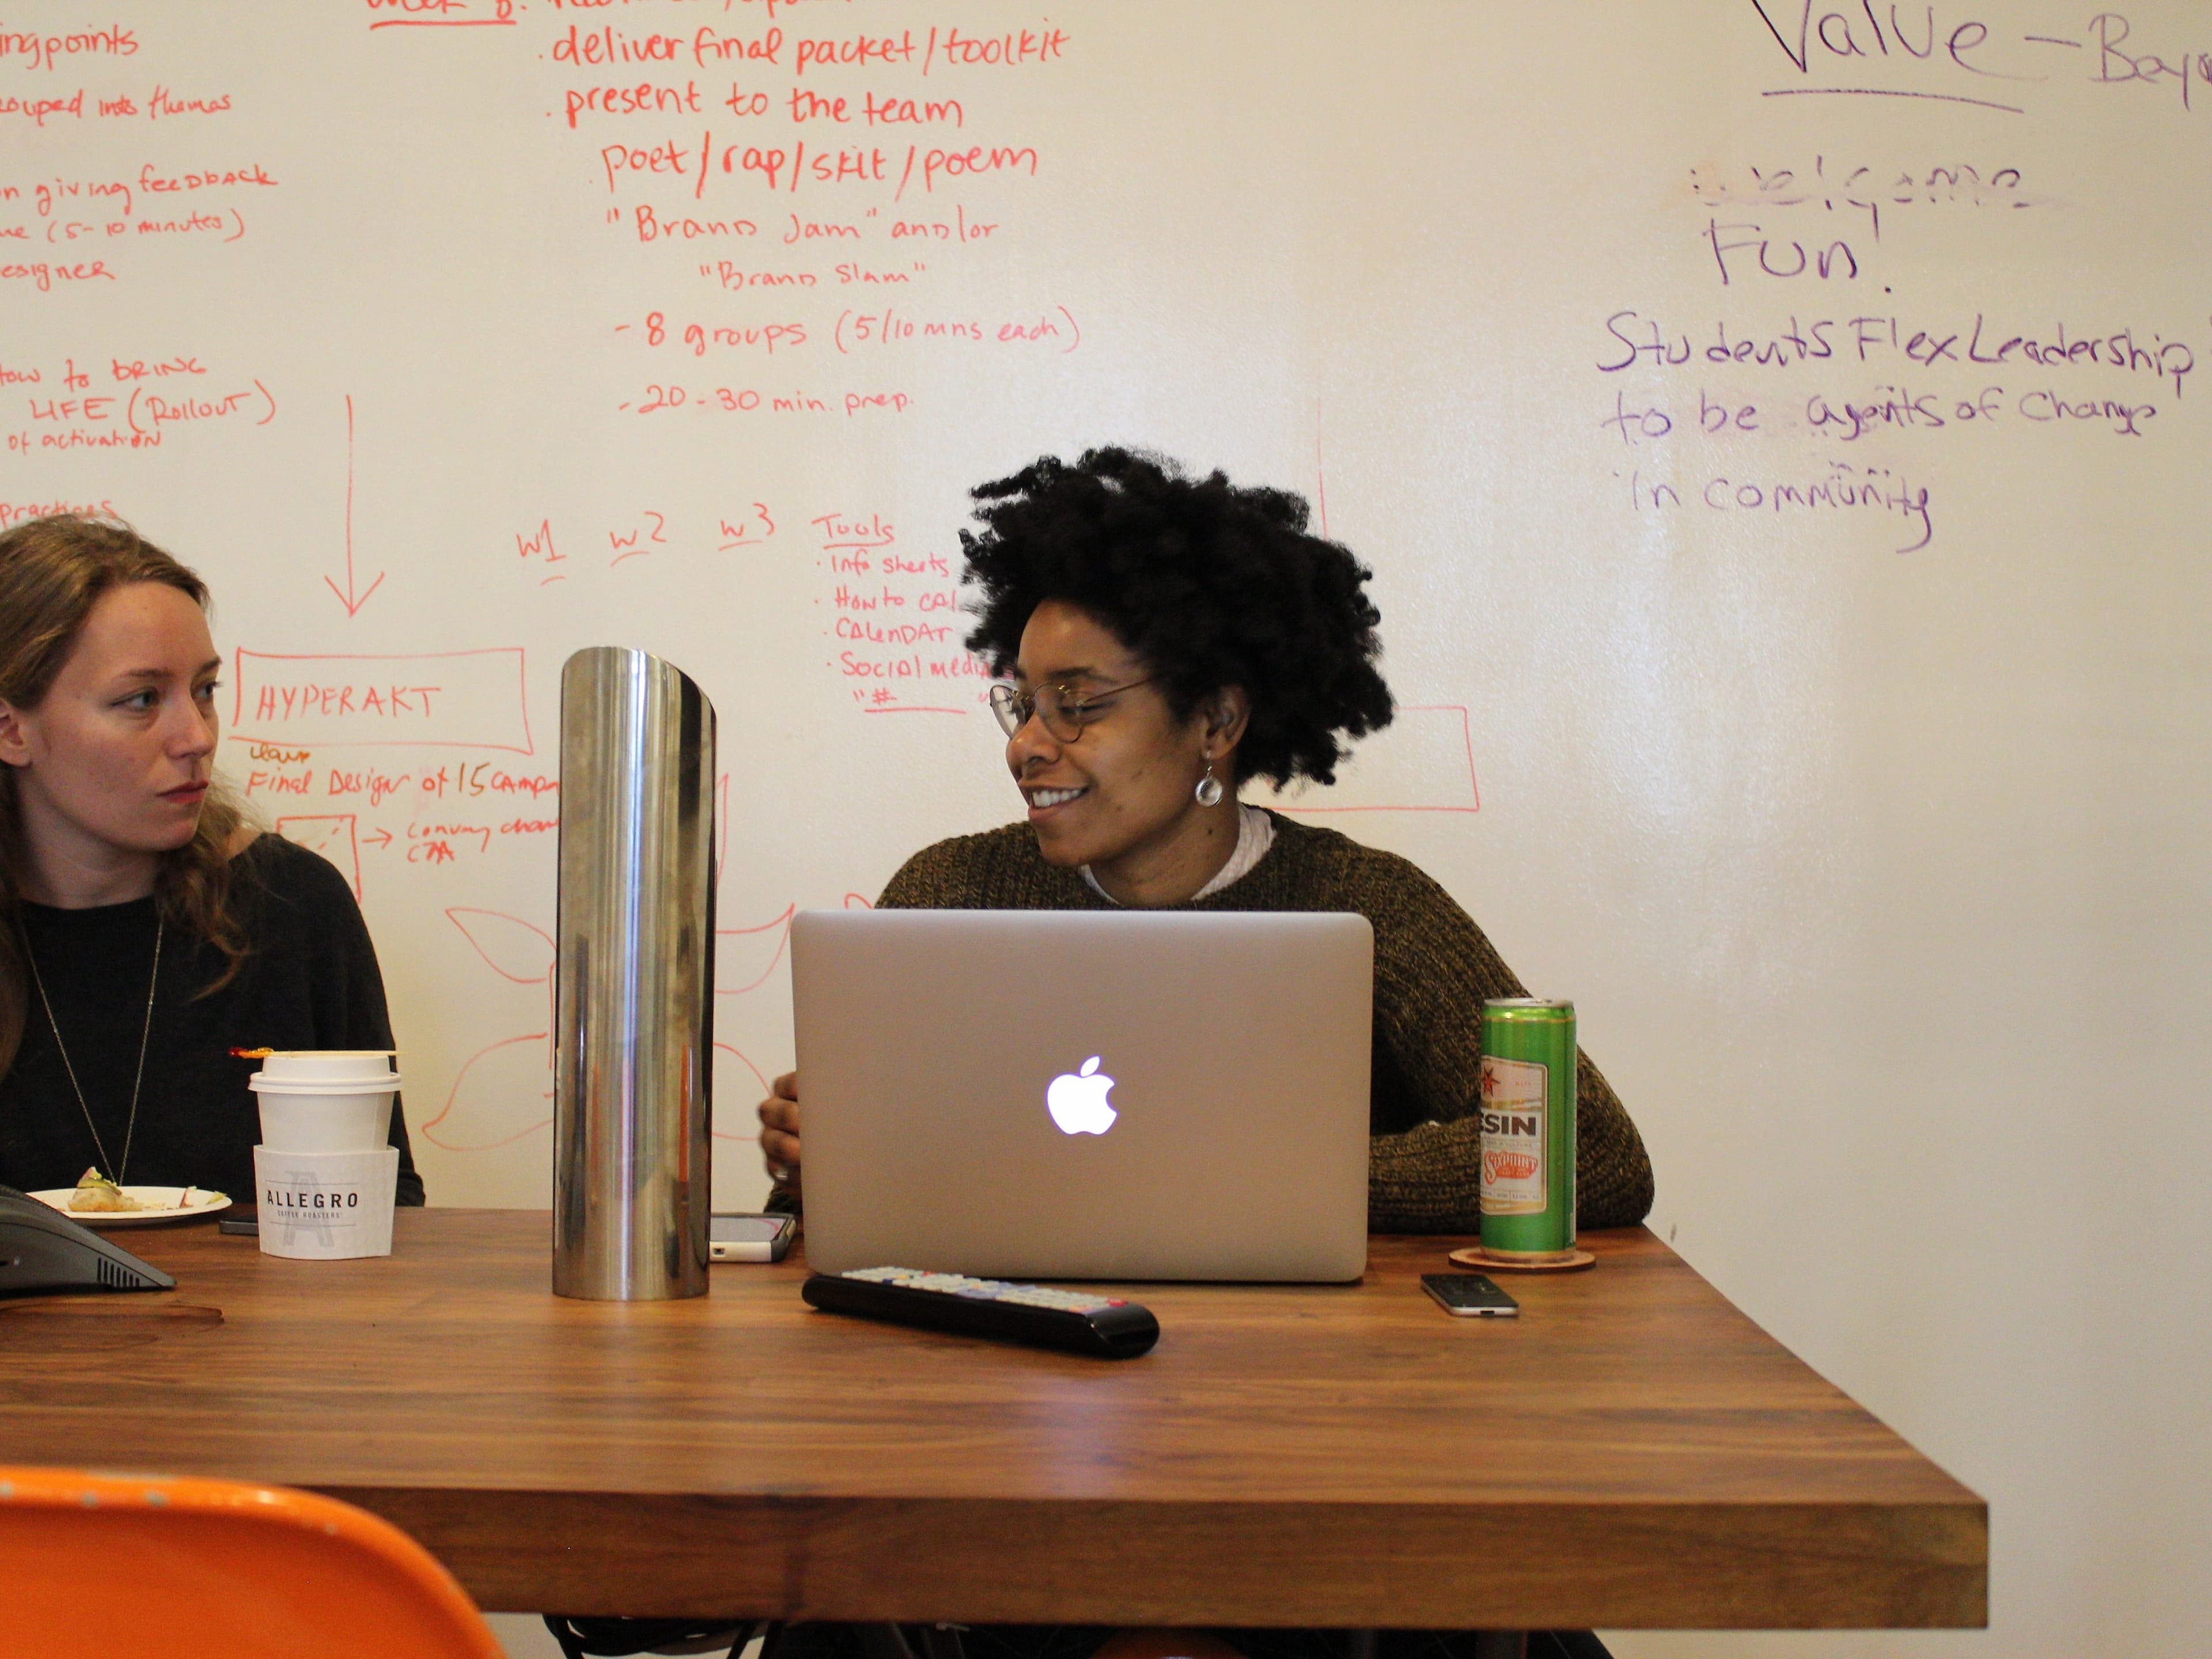 Two people sit at a wooden table in front of a whiteboard covered in red and black text. One person with curly hair and glasses uses a MacBook, smiling. The other looks at her, holding a plate. The table has a metal water bottle, coffee cups, and a drink can.